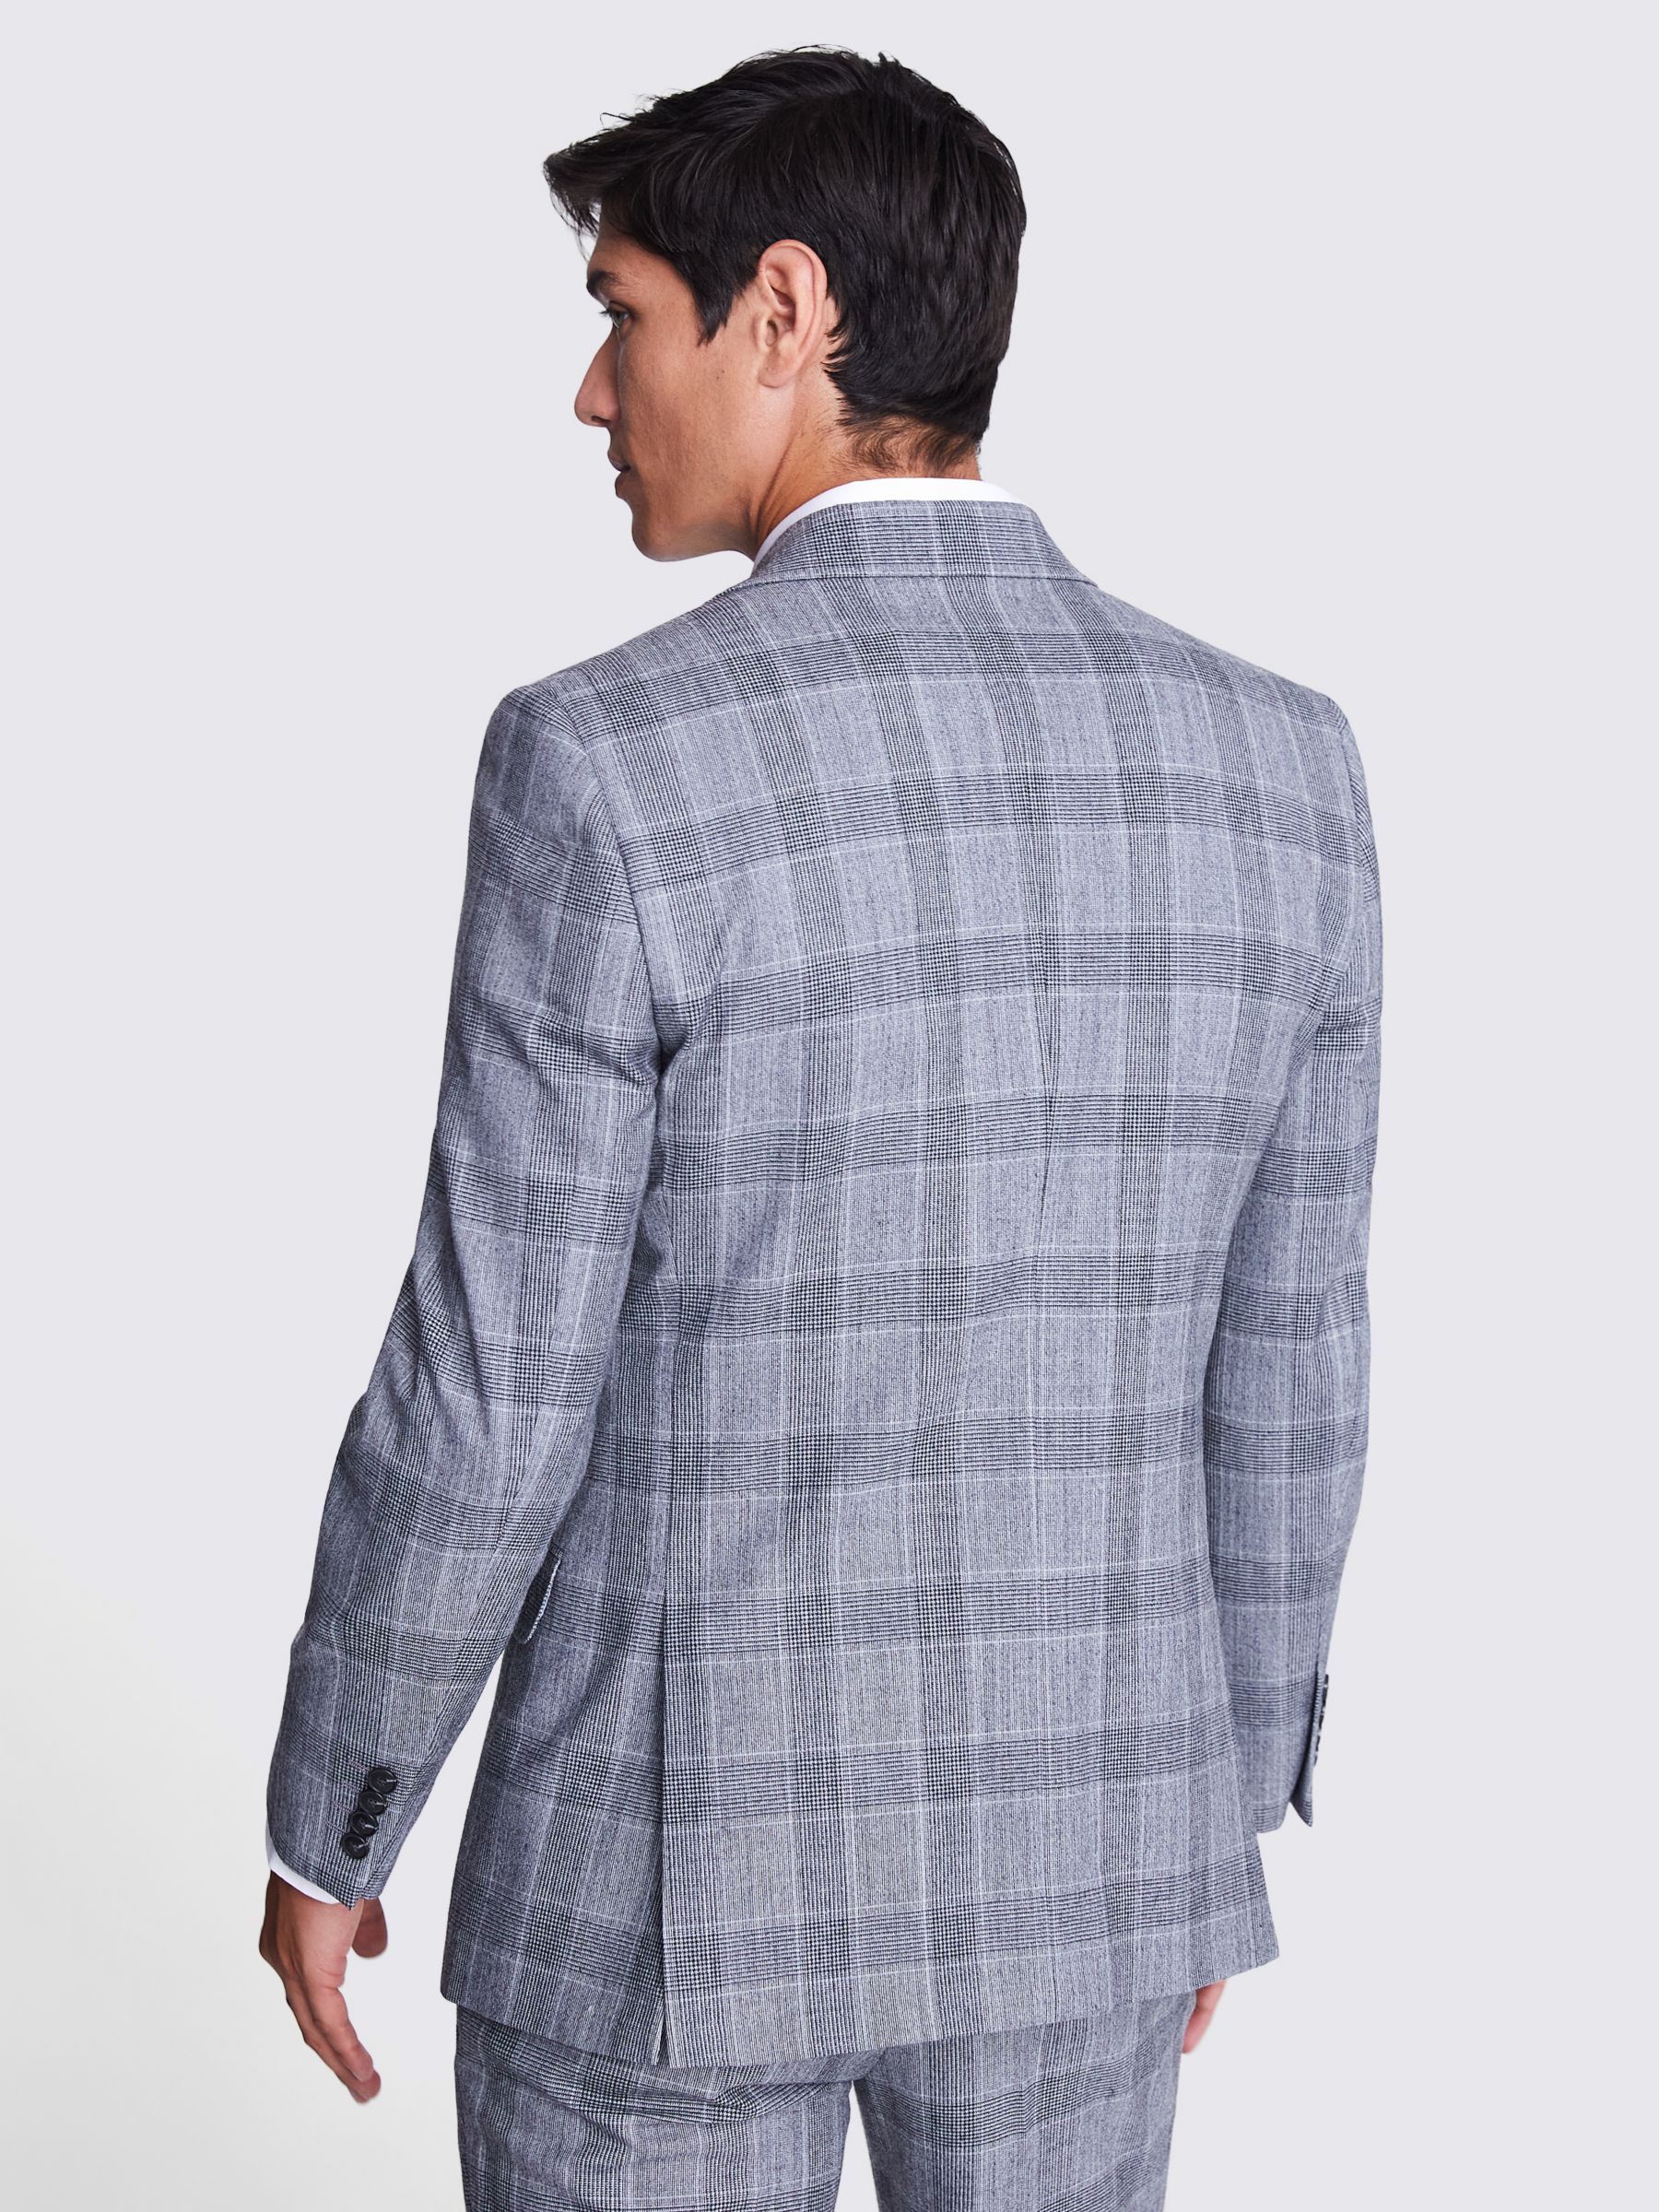 Moss Wool Blend Checked Tailored Fit Suit Jacket, Multi, 42R